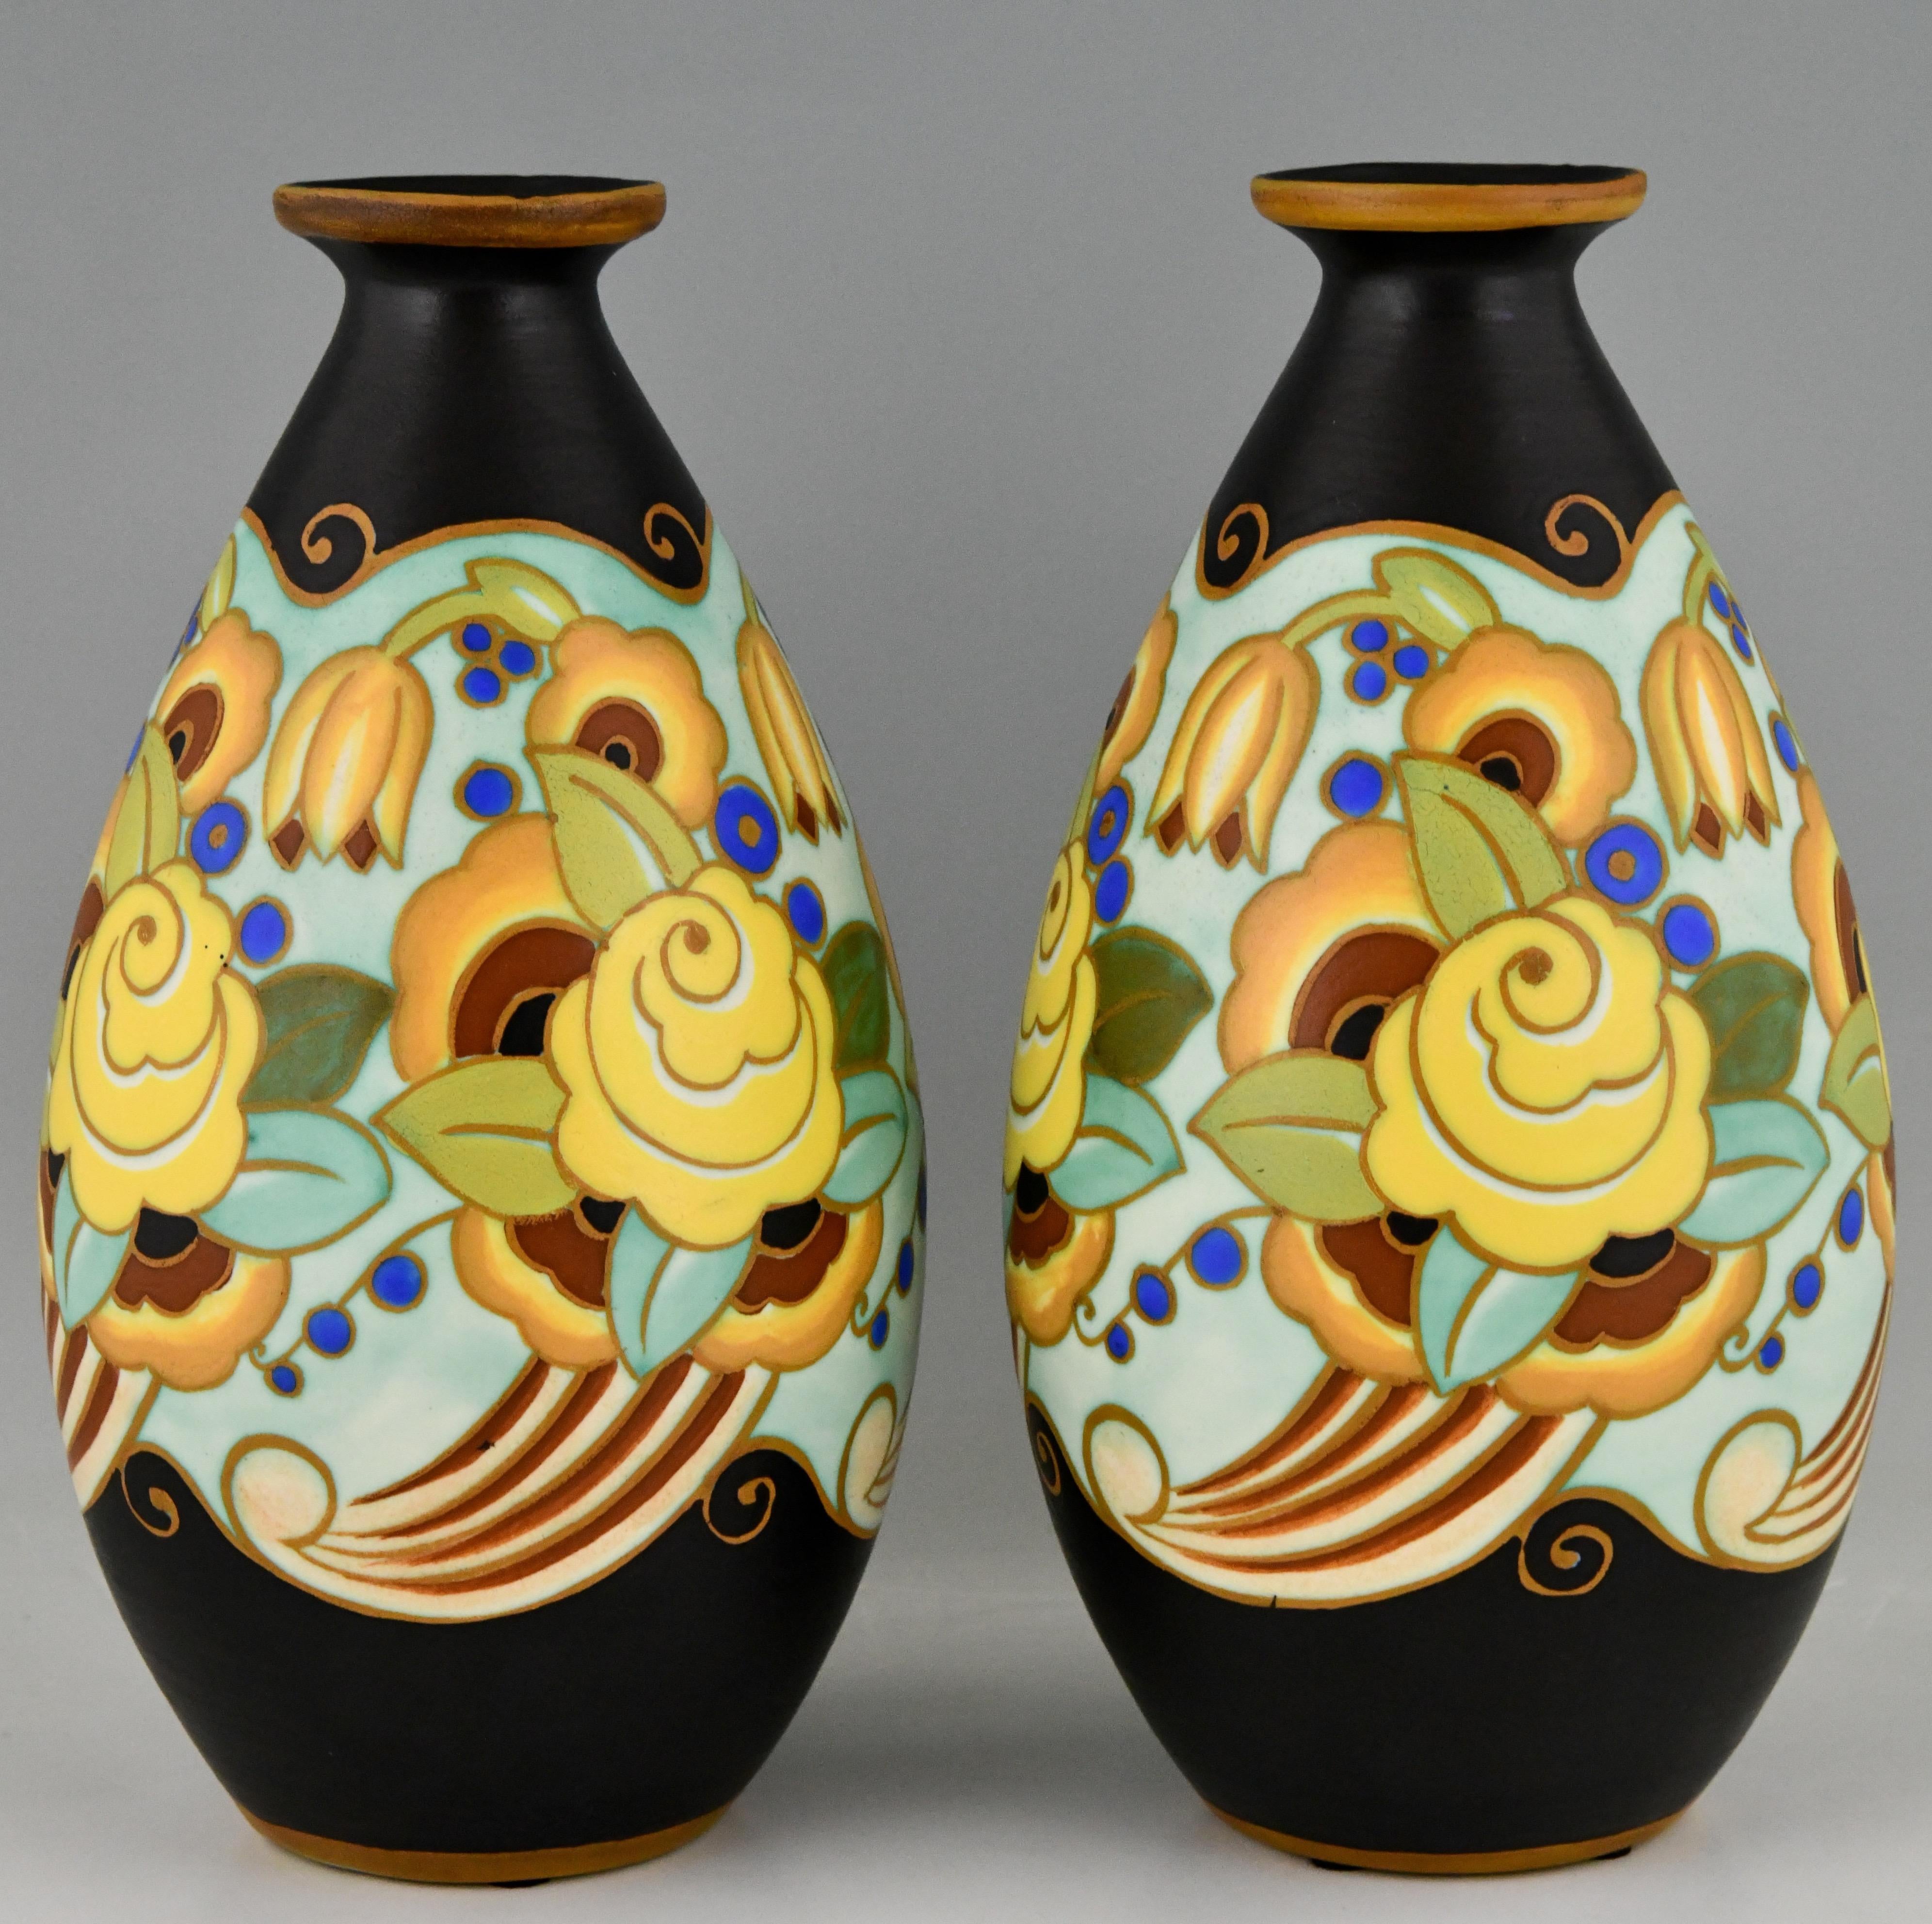 A pair of Art Deco ceramic vases with flowers by Boch Frères Keramis. Yellow flowers on a brown background. Belgium 1931/1932. Keramis stamp. Numbered D1733 for the decor.

This decor is illustrated in Art Deco Ceramics, Charles Catteau by Marc